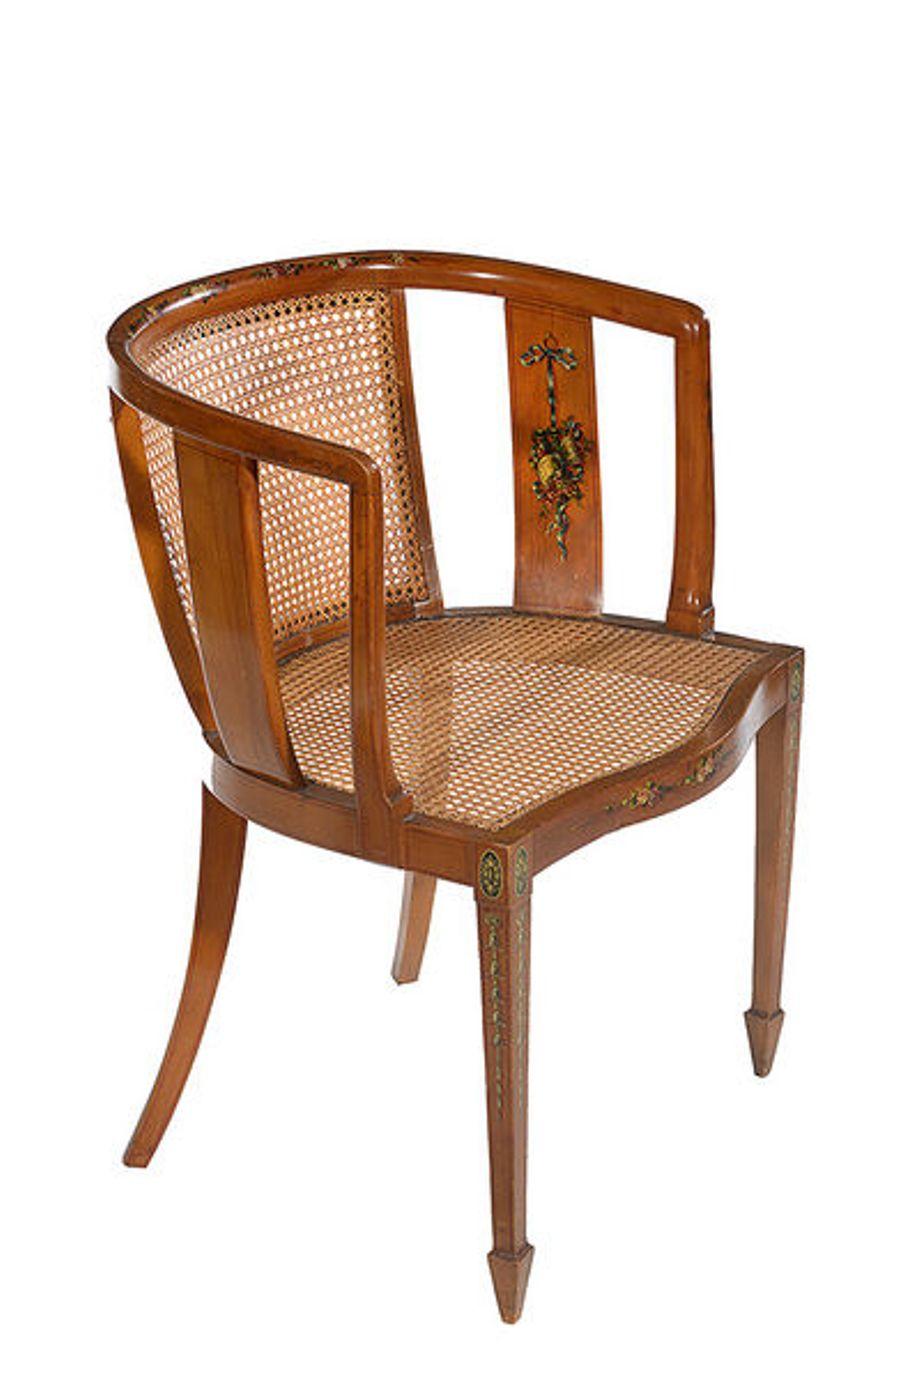 Sheraton Style Satinwood Occasional Chair with Painted Decoration For Sale 2